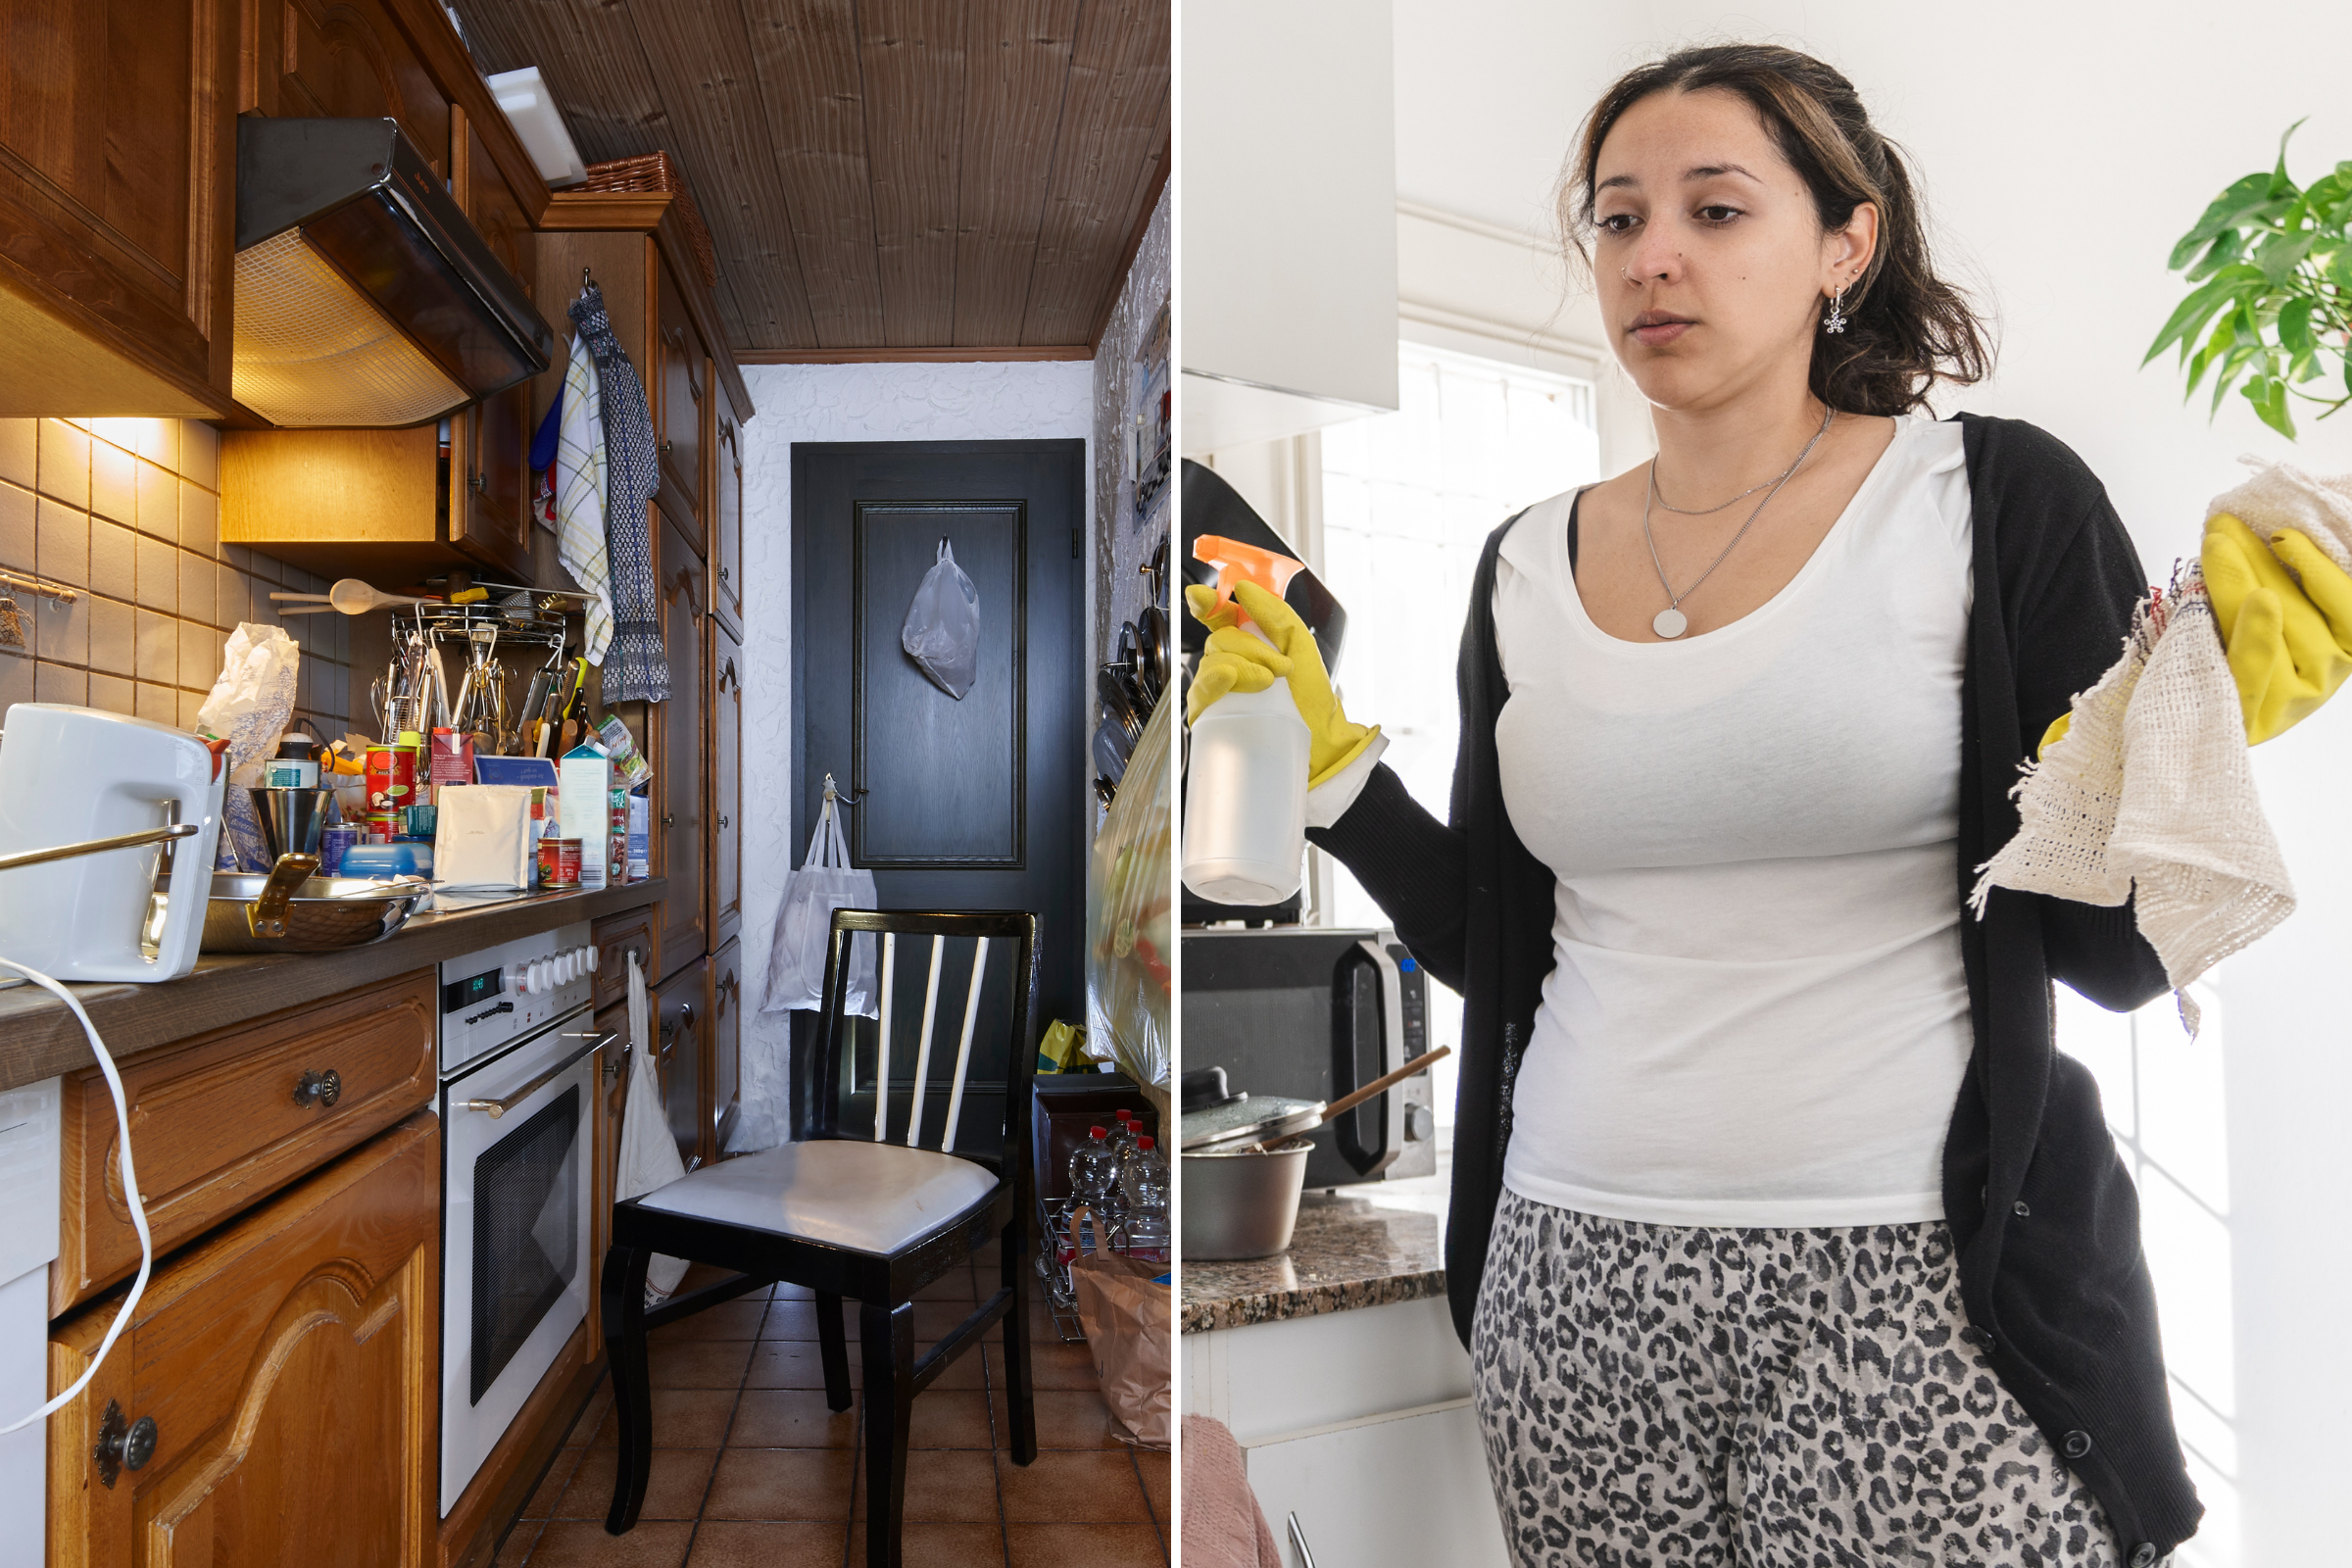 ‘To Clean or Not To Clean?’ Web Horrified by State of Mom’s Messy Home